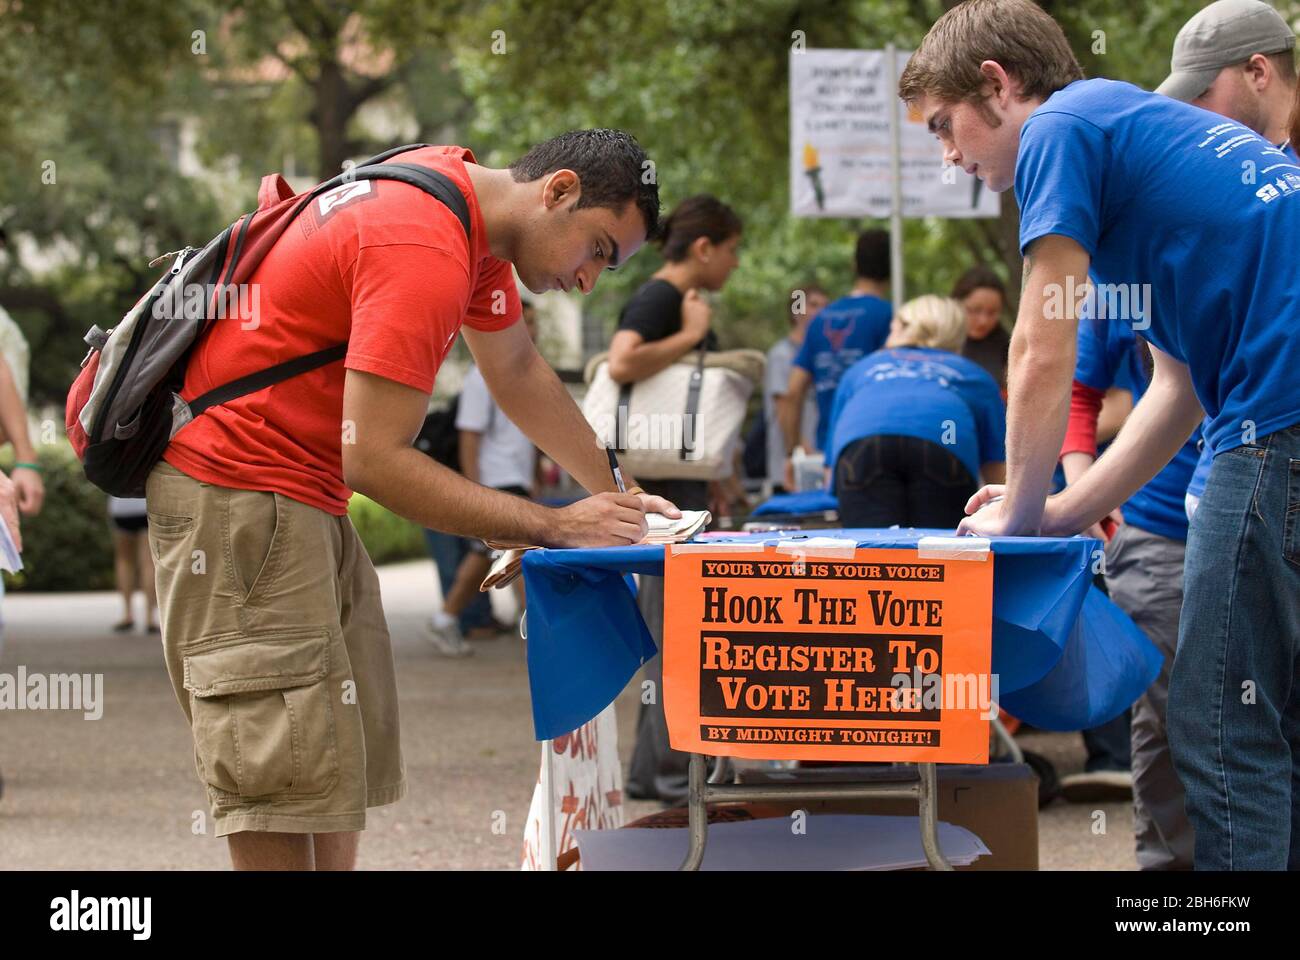 Austin, Texas USA, 2008. College student registers to vote during voter registration drive at the University of Texas campus. ©Marjorie Kamys Cotera/Daemmrich Photography Stock Photo